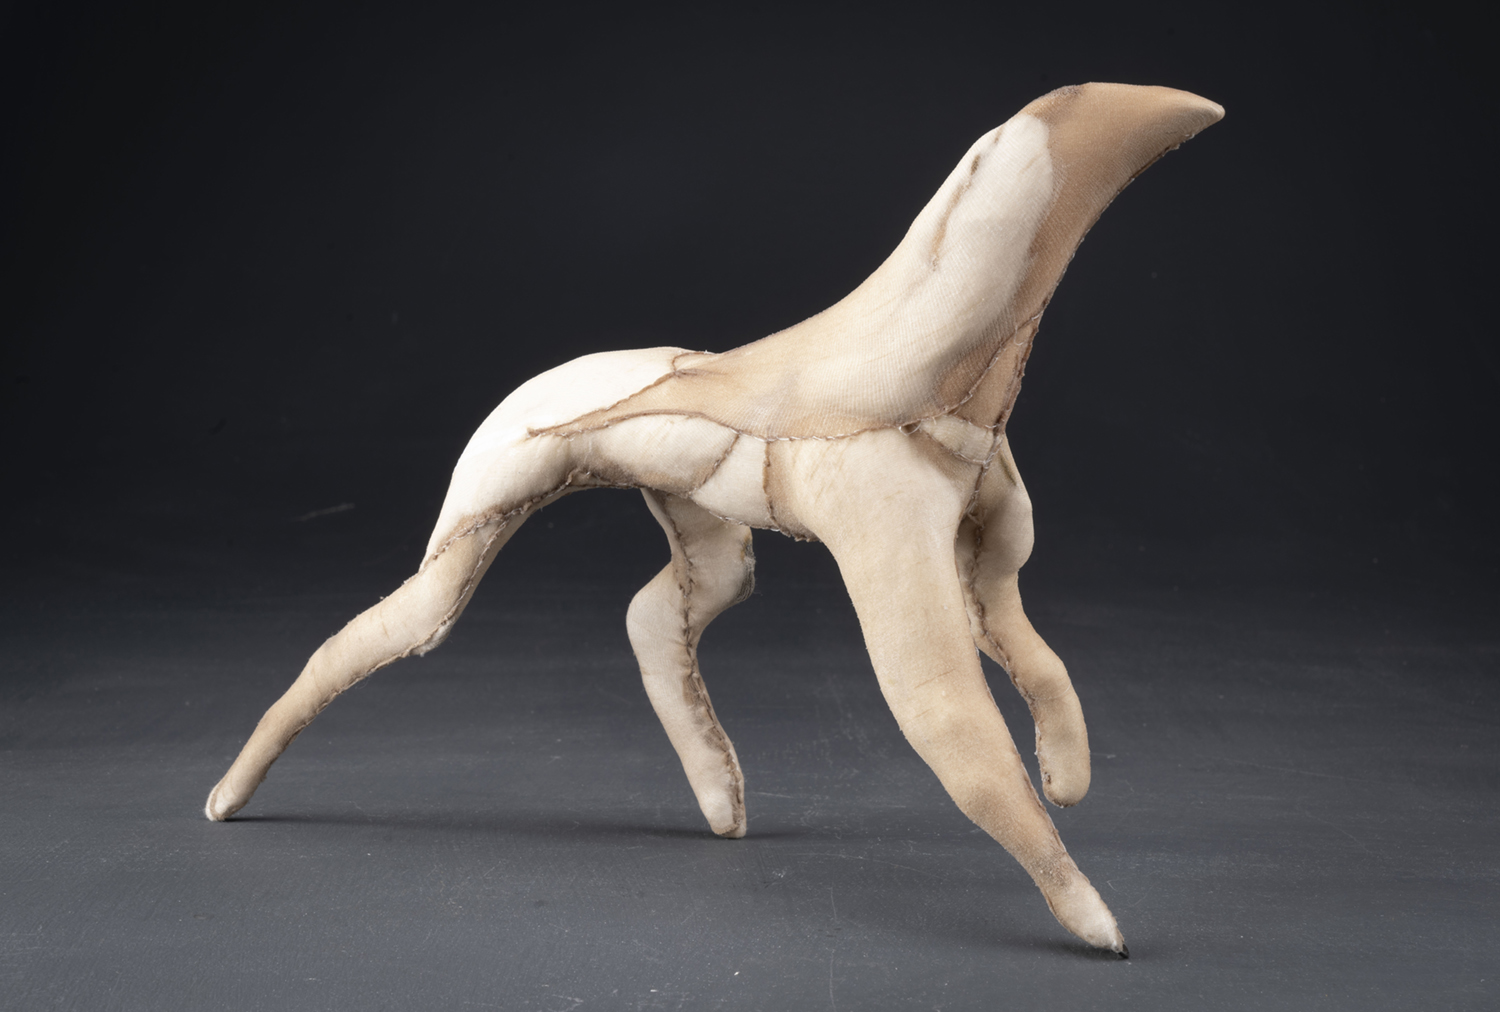 Sculpture of a lunging animal, courtesy of the artist